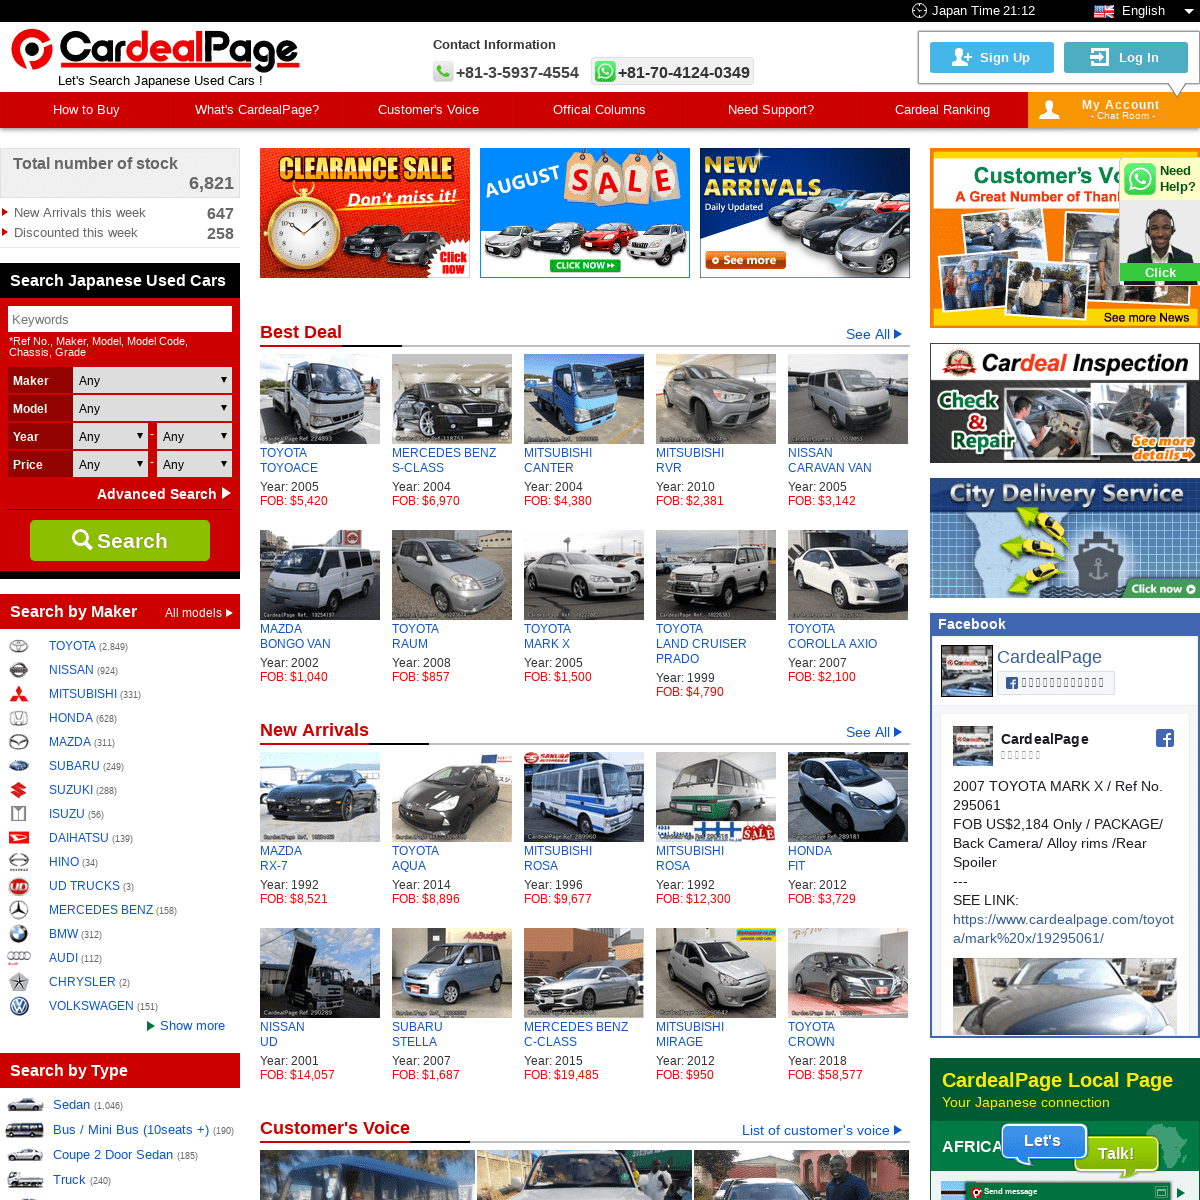 Japanese Used Cars for sale | CardealPage